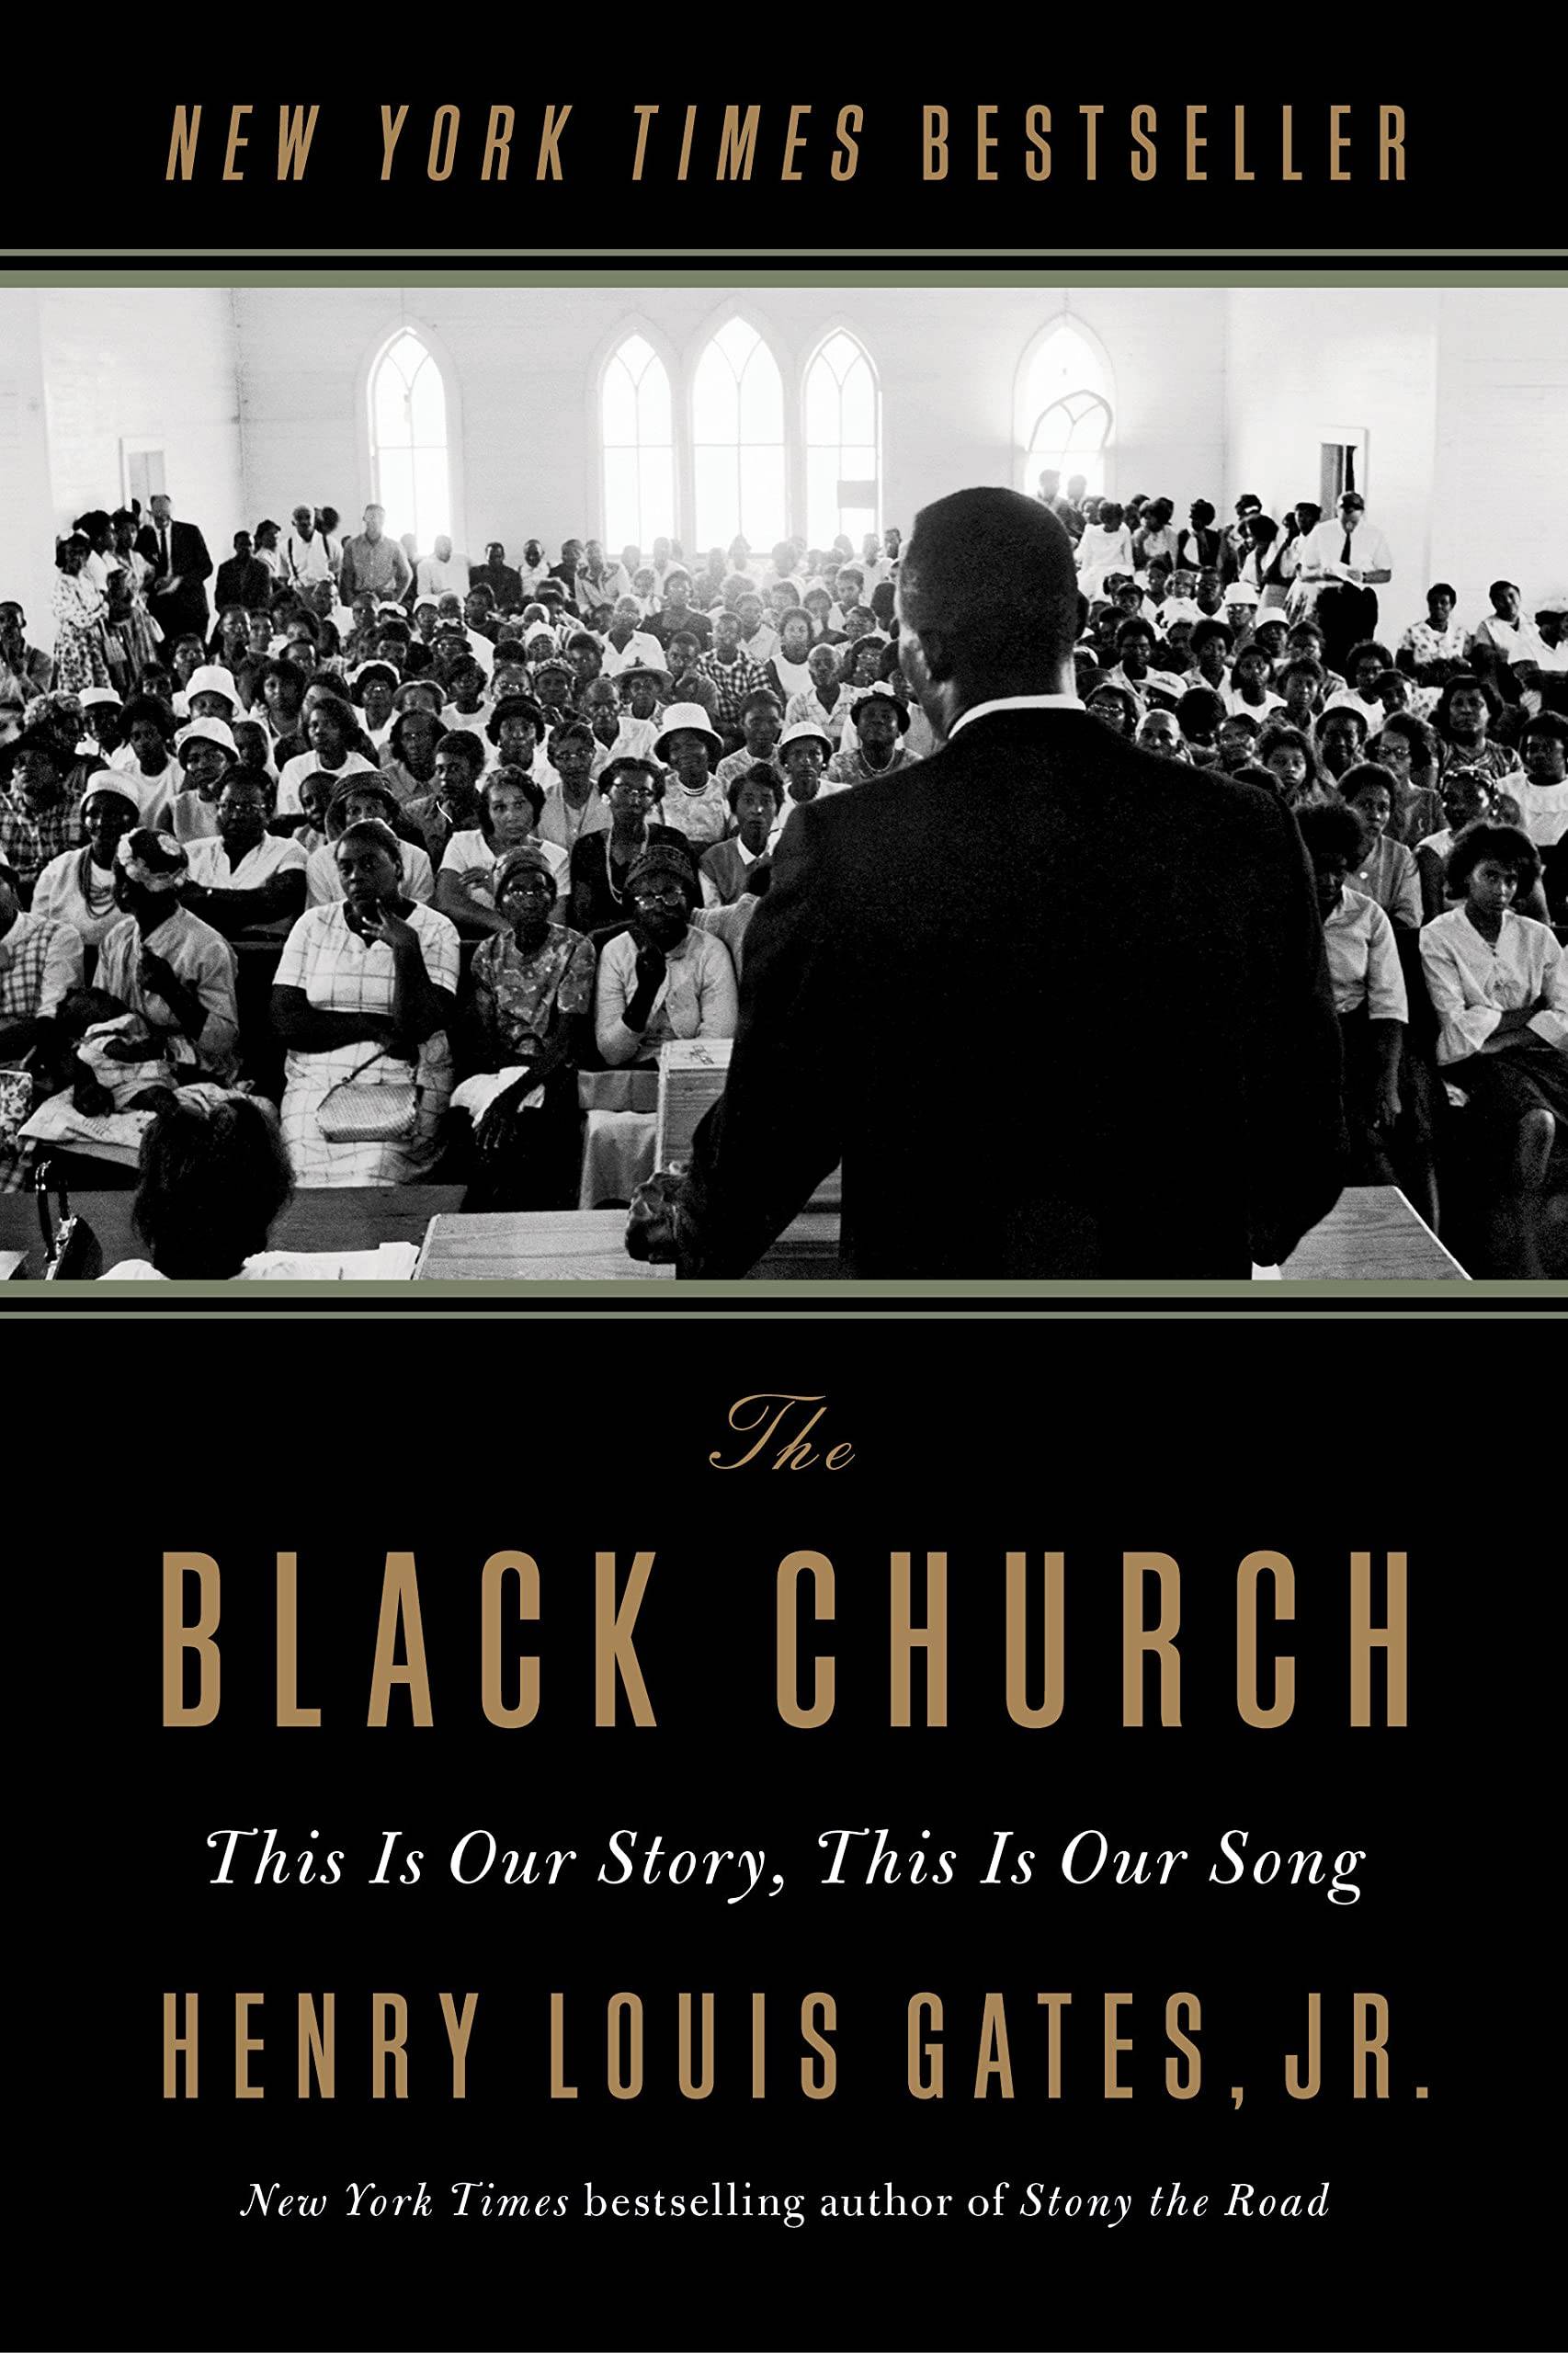 Book cover featuring a black and white photo of a preacher looking out onto the large black congregation